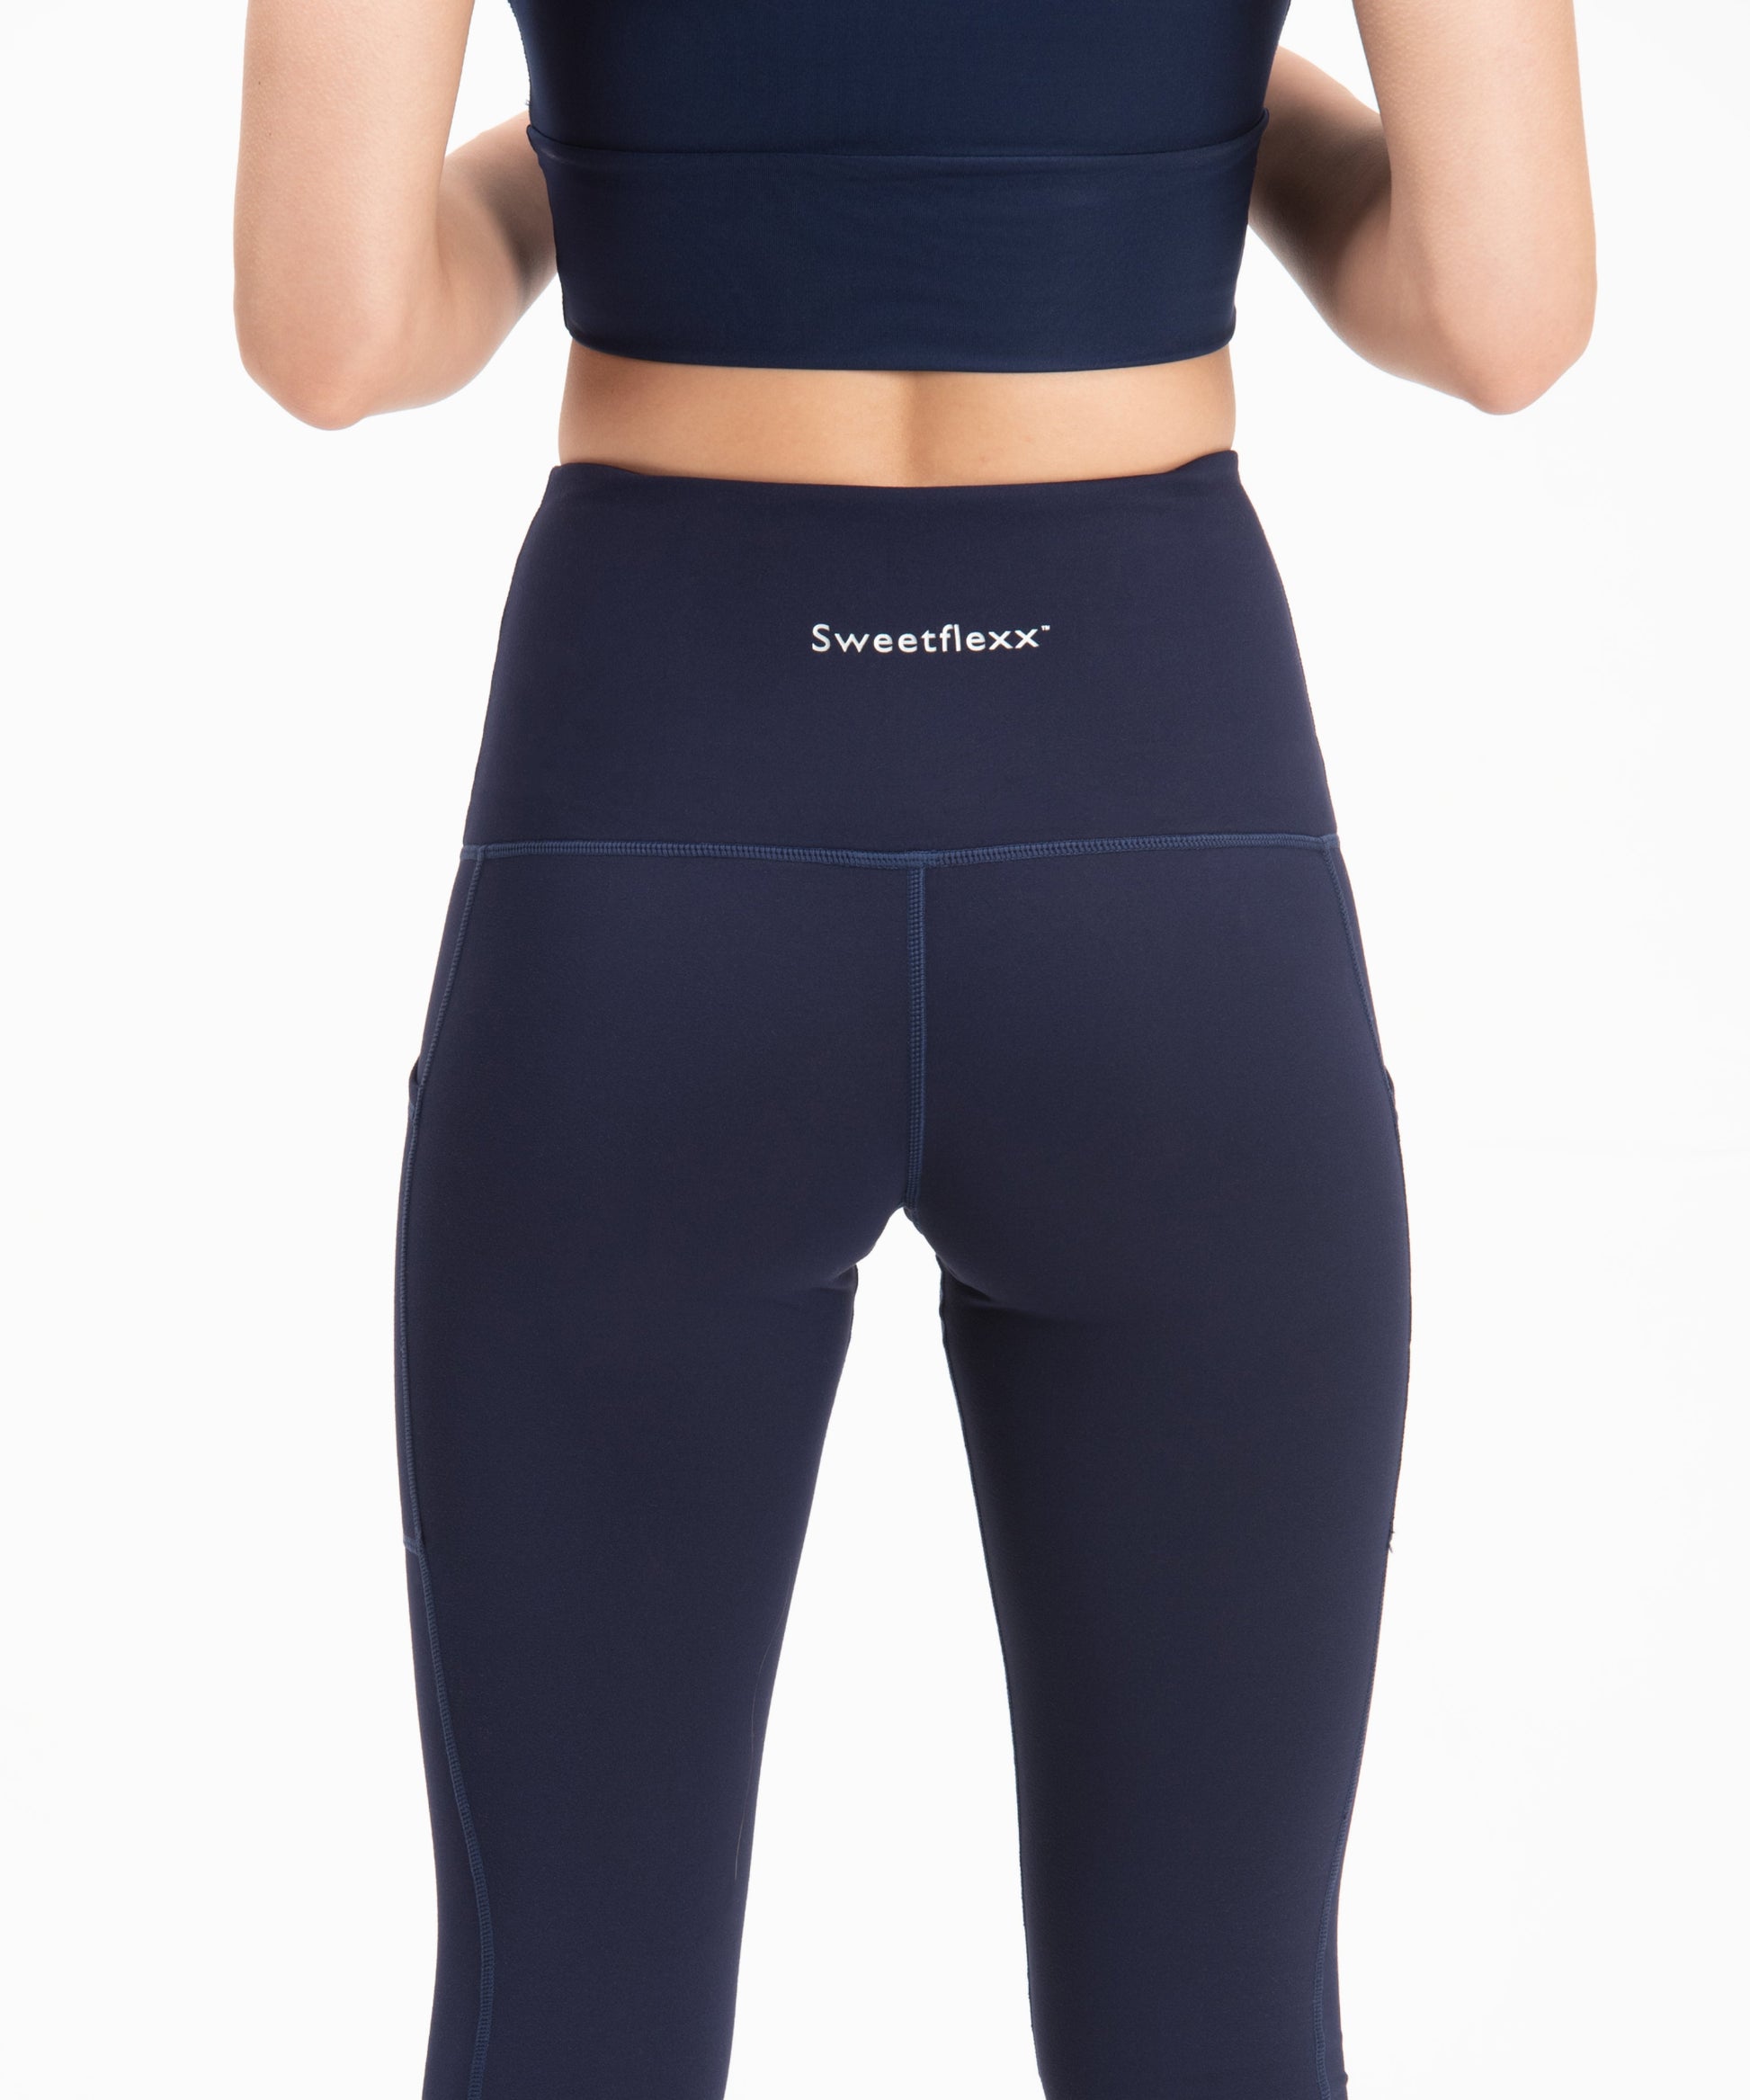 Sweetflex Resistance Leggings for Women with Pockets,Sweetflex